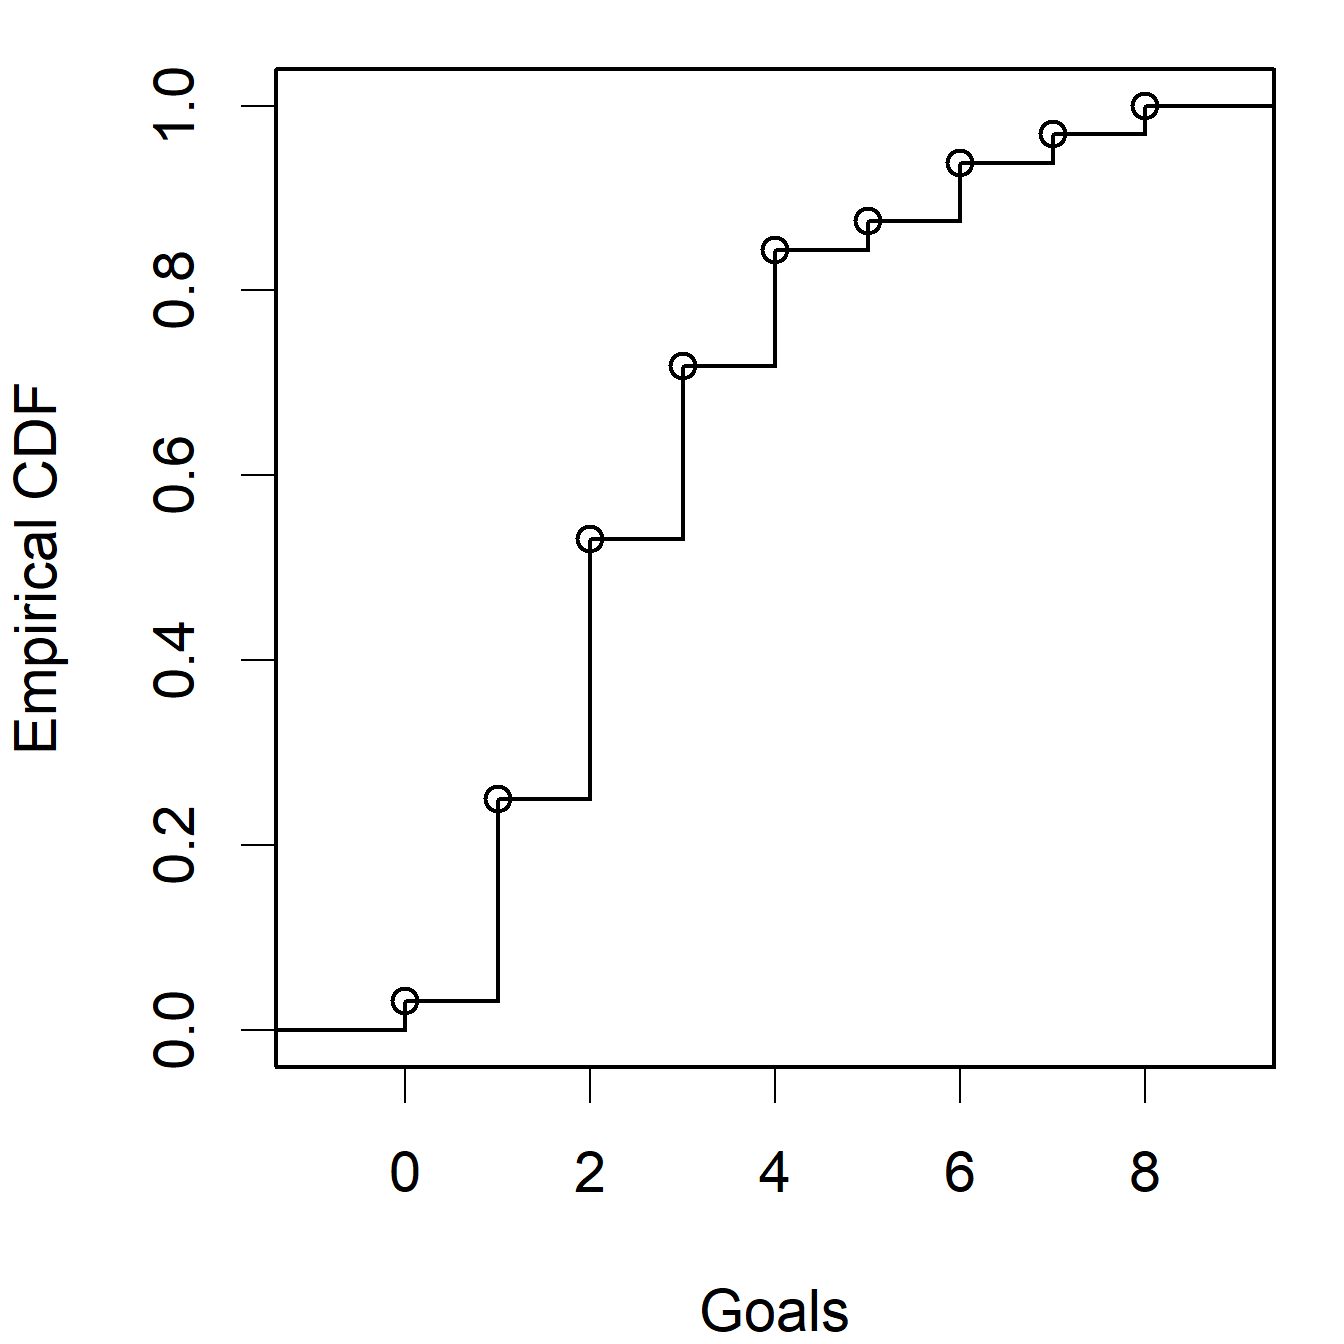 Empirical cdf plots for the 'Goals' and 'IQ' data sets